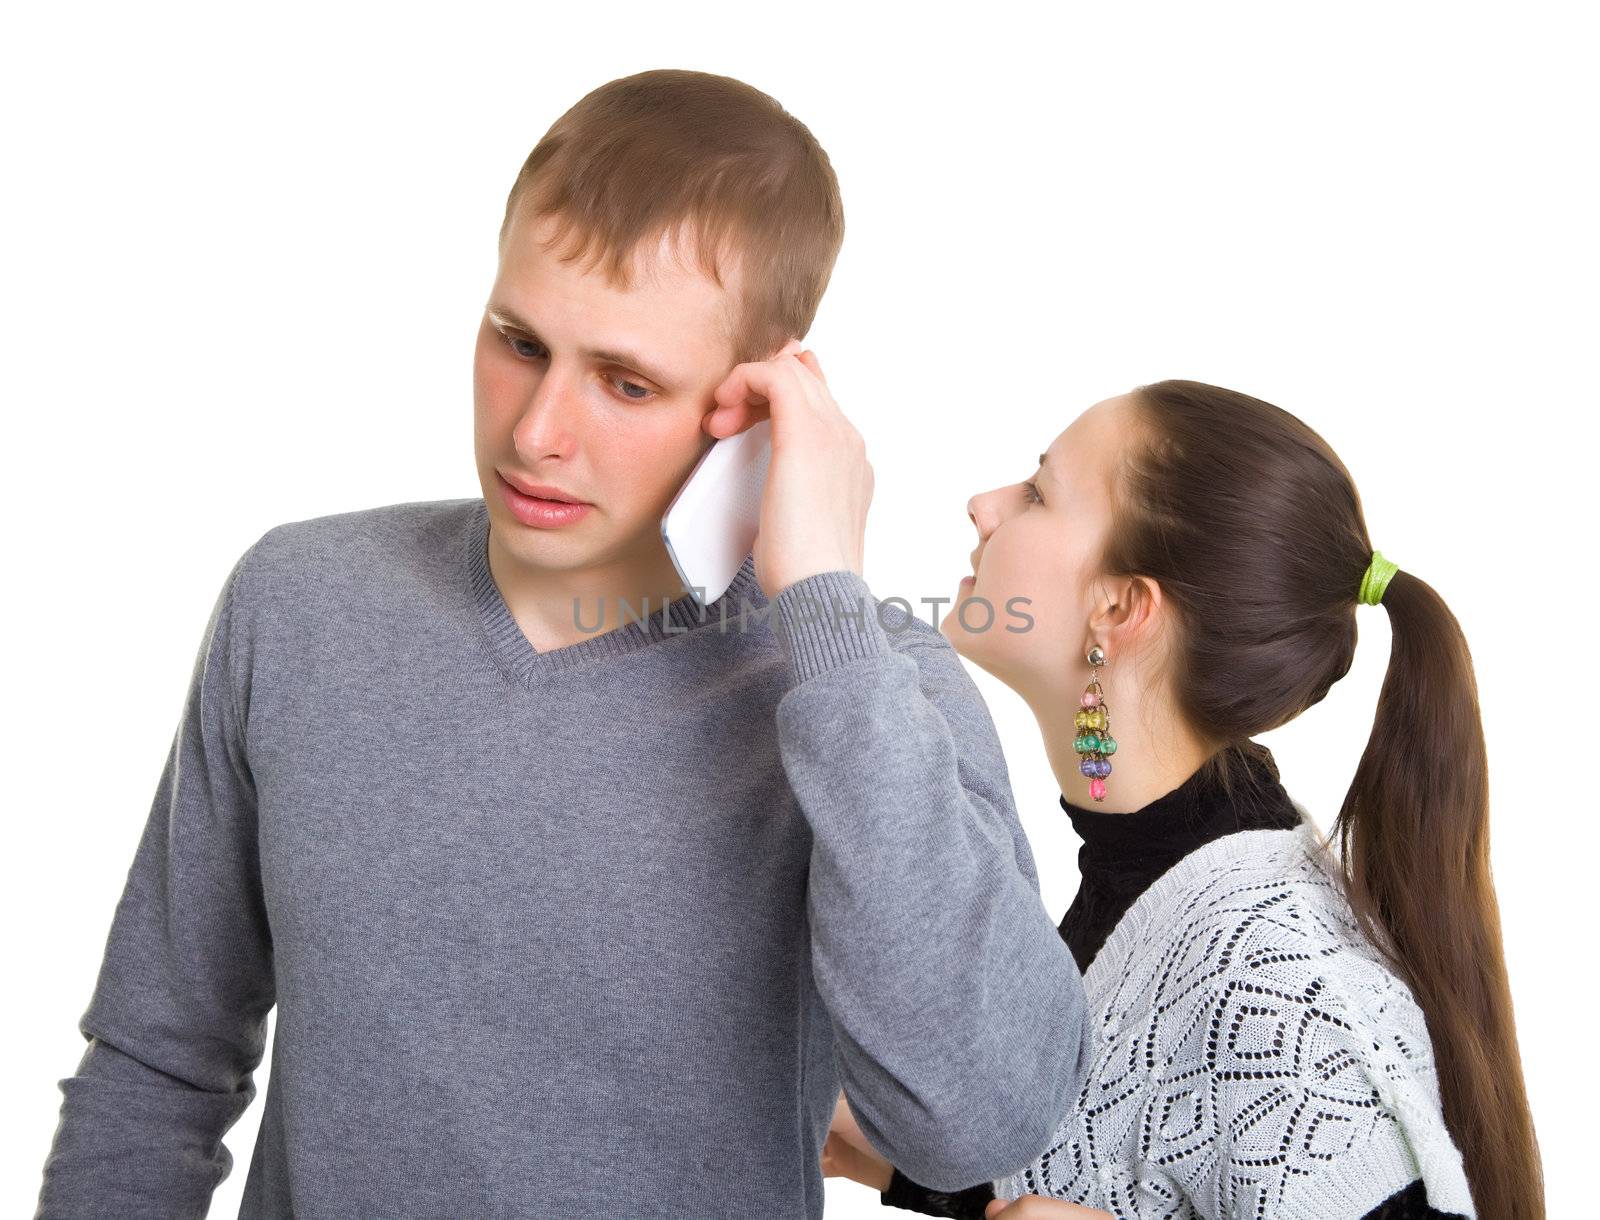 Boy and girl talking on a cell phone. Isolated on white background.